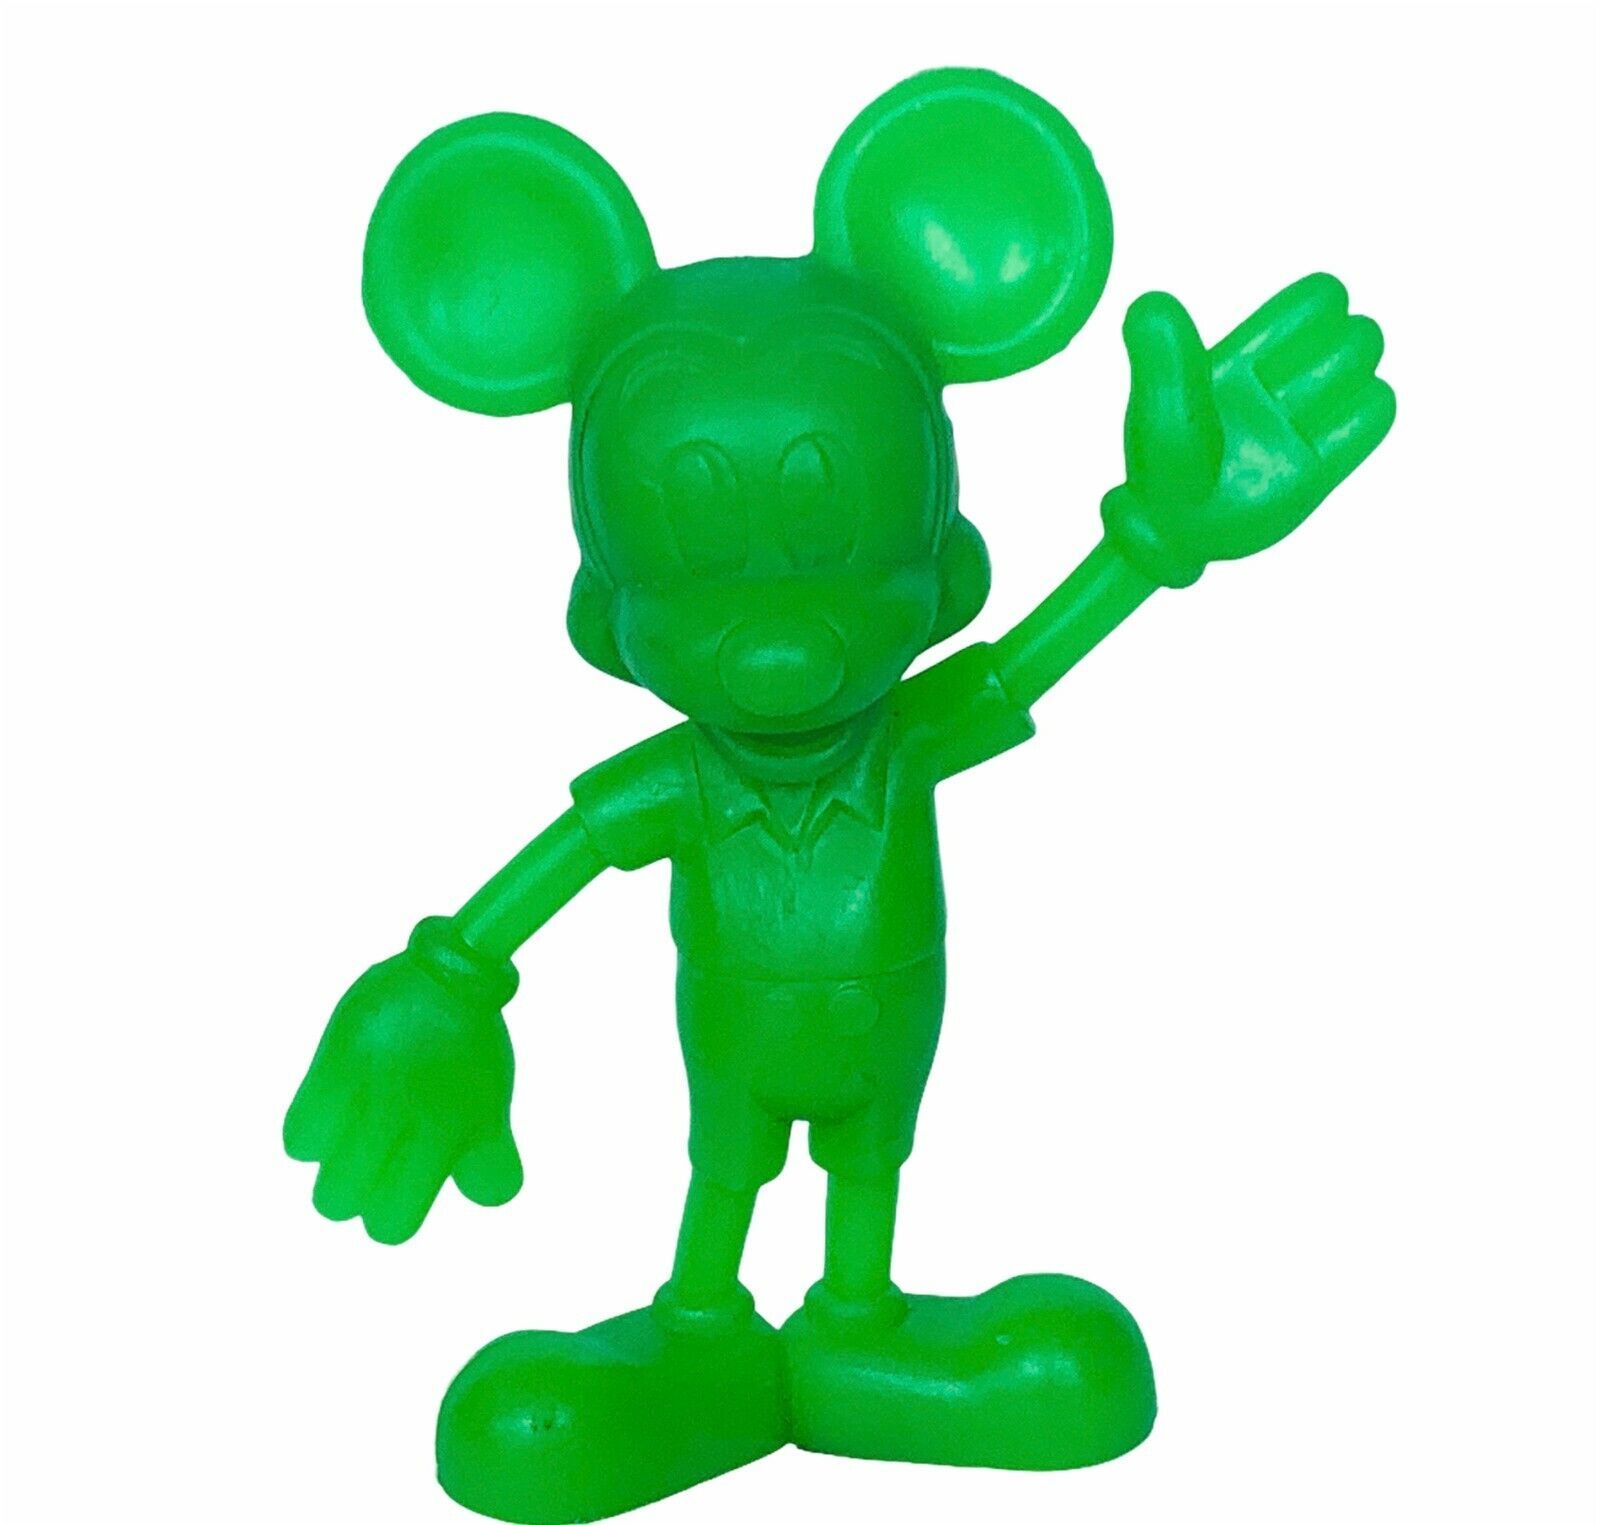 Primary image for Louis Marx Toys Walt Disney figurine vtg 1960s RARE 6" Green Mickey Mouse neon